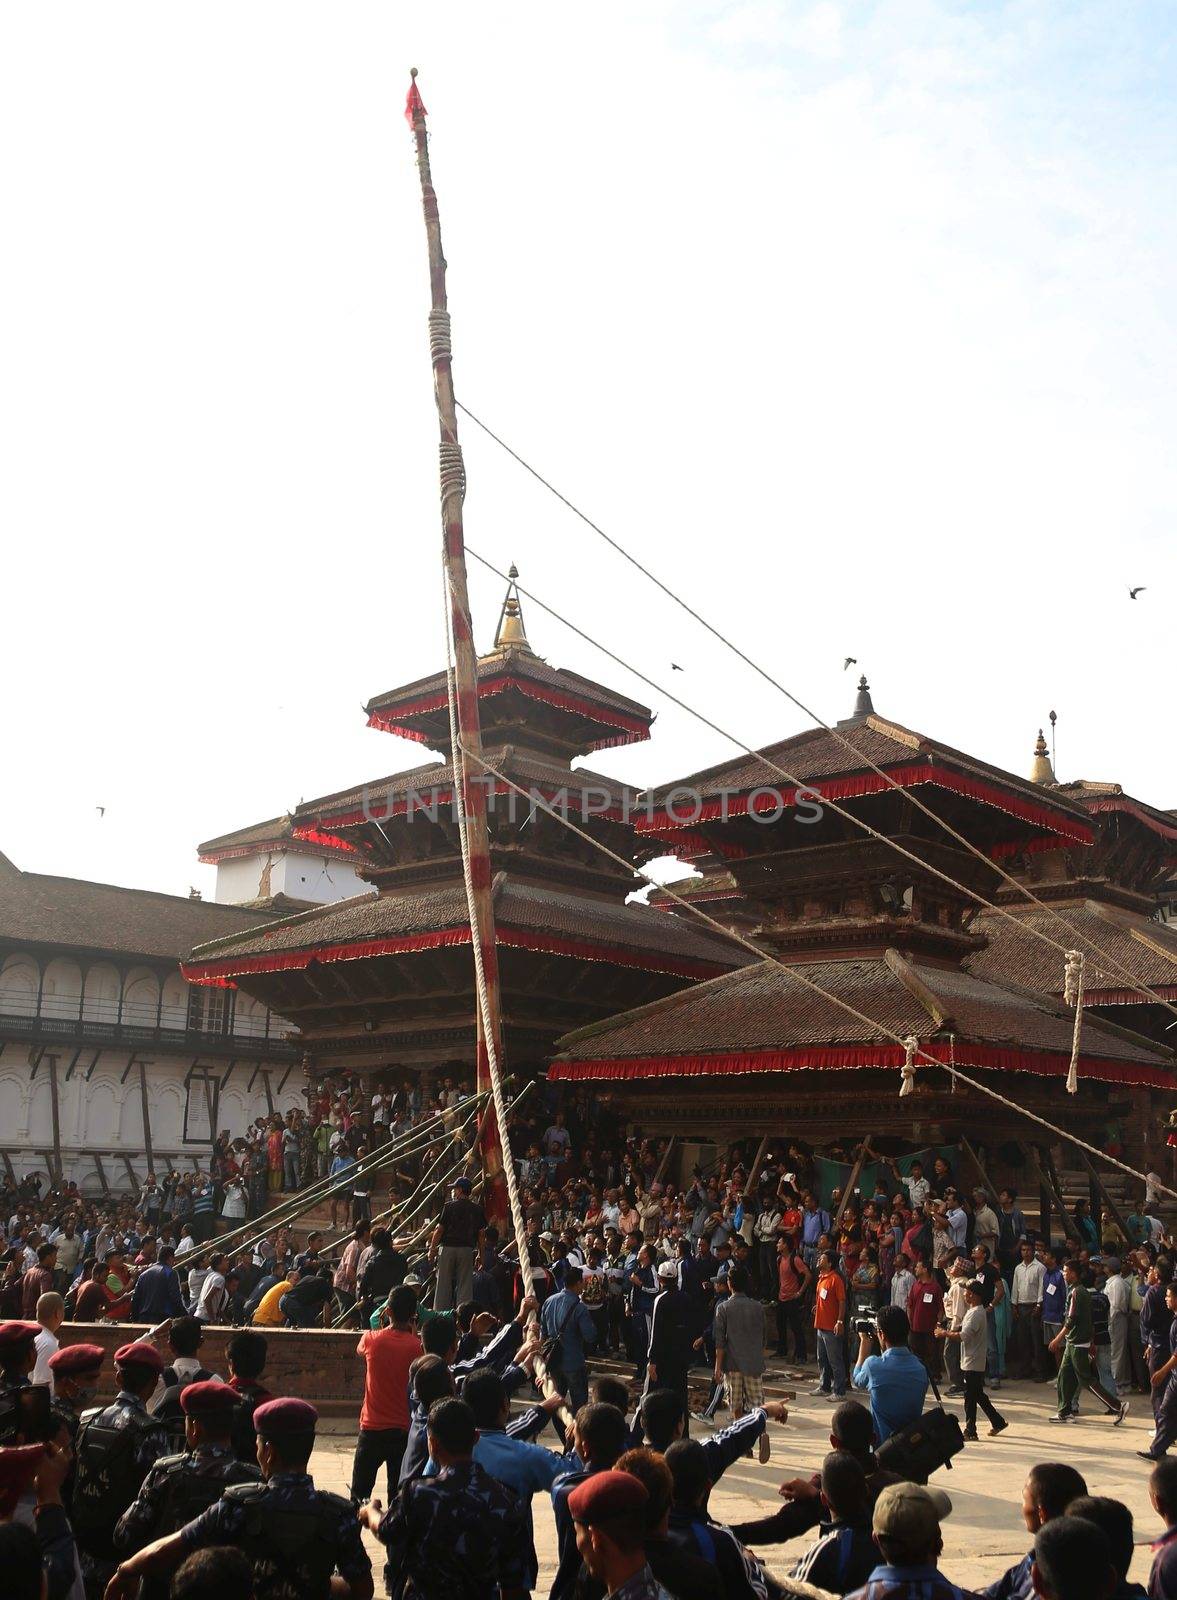 NEPAL, Kathmandu:  	The erection of a wooden Indradhoj pole in Hanumandhoka�Durbar Square on September 25, 2015 marked the beginning of Indrajatra festival in Kathmandu, Nepal.  	Indrajatra is an eight day festival with a chariot procession dedicated to Goddess Kumari, Lord Ganesh and Bhairav, as well as worshiping Indra, the king of gods. 